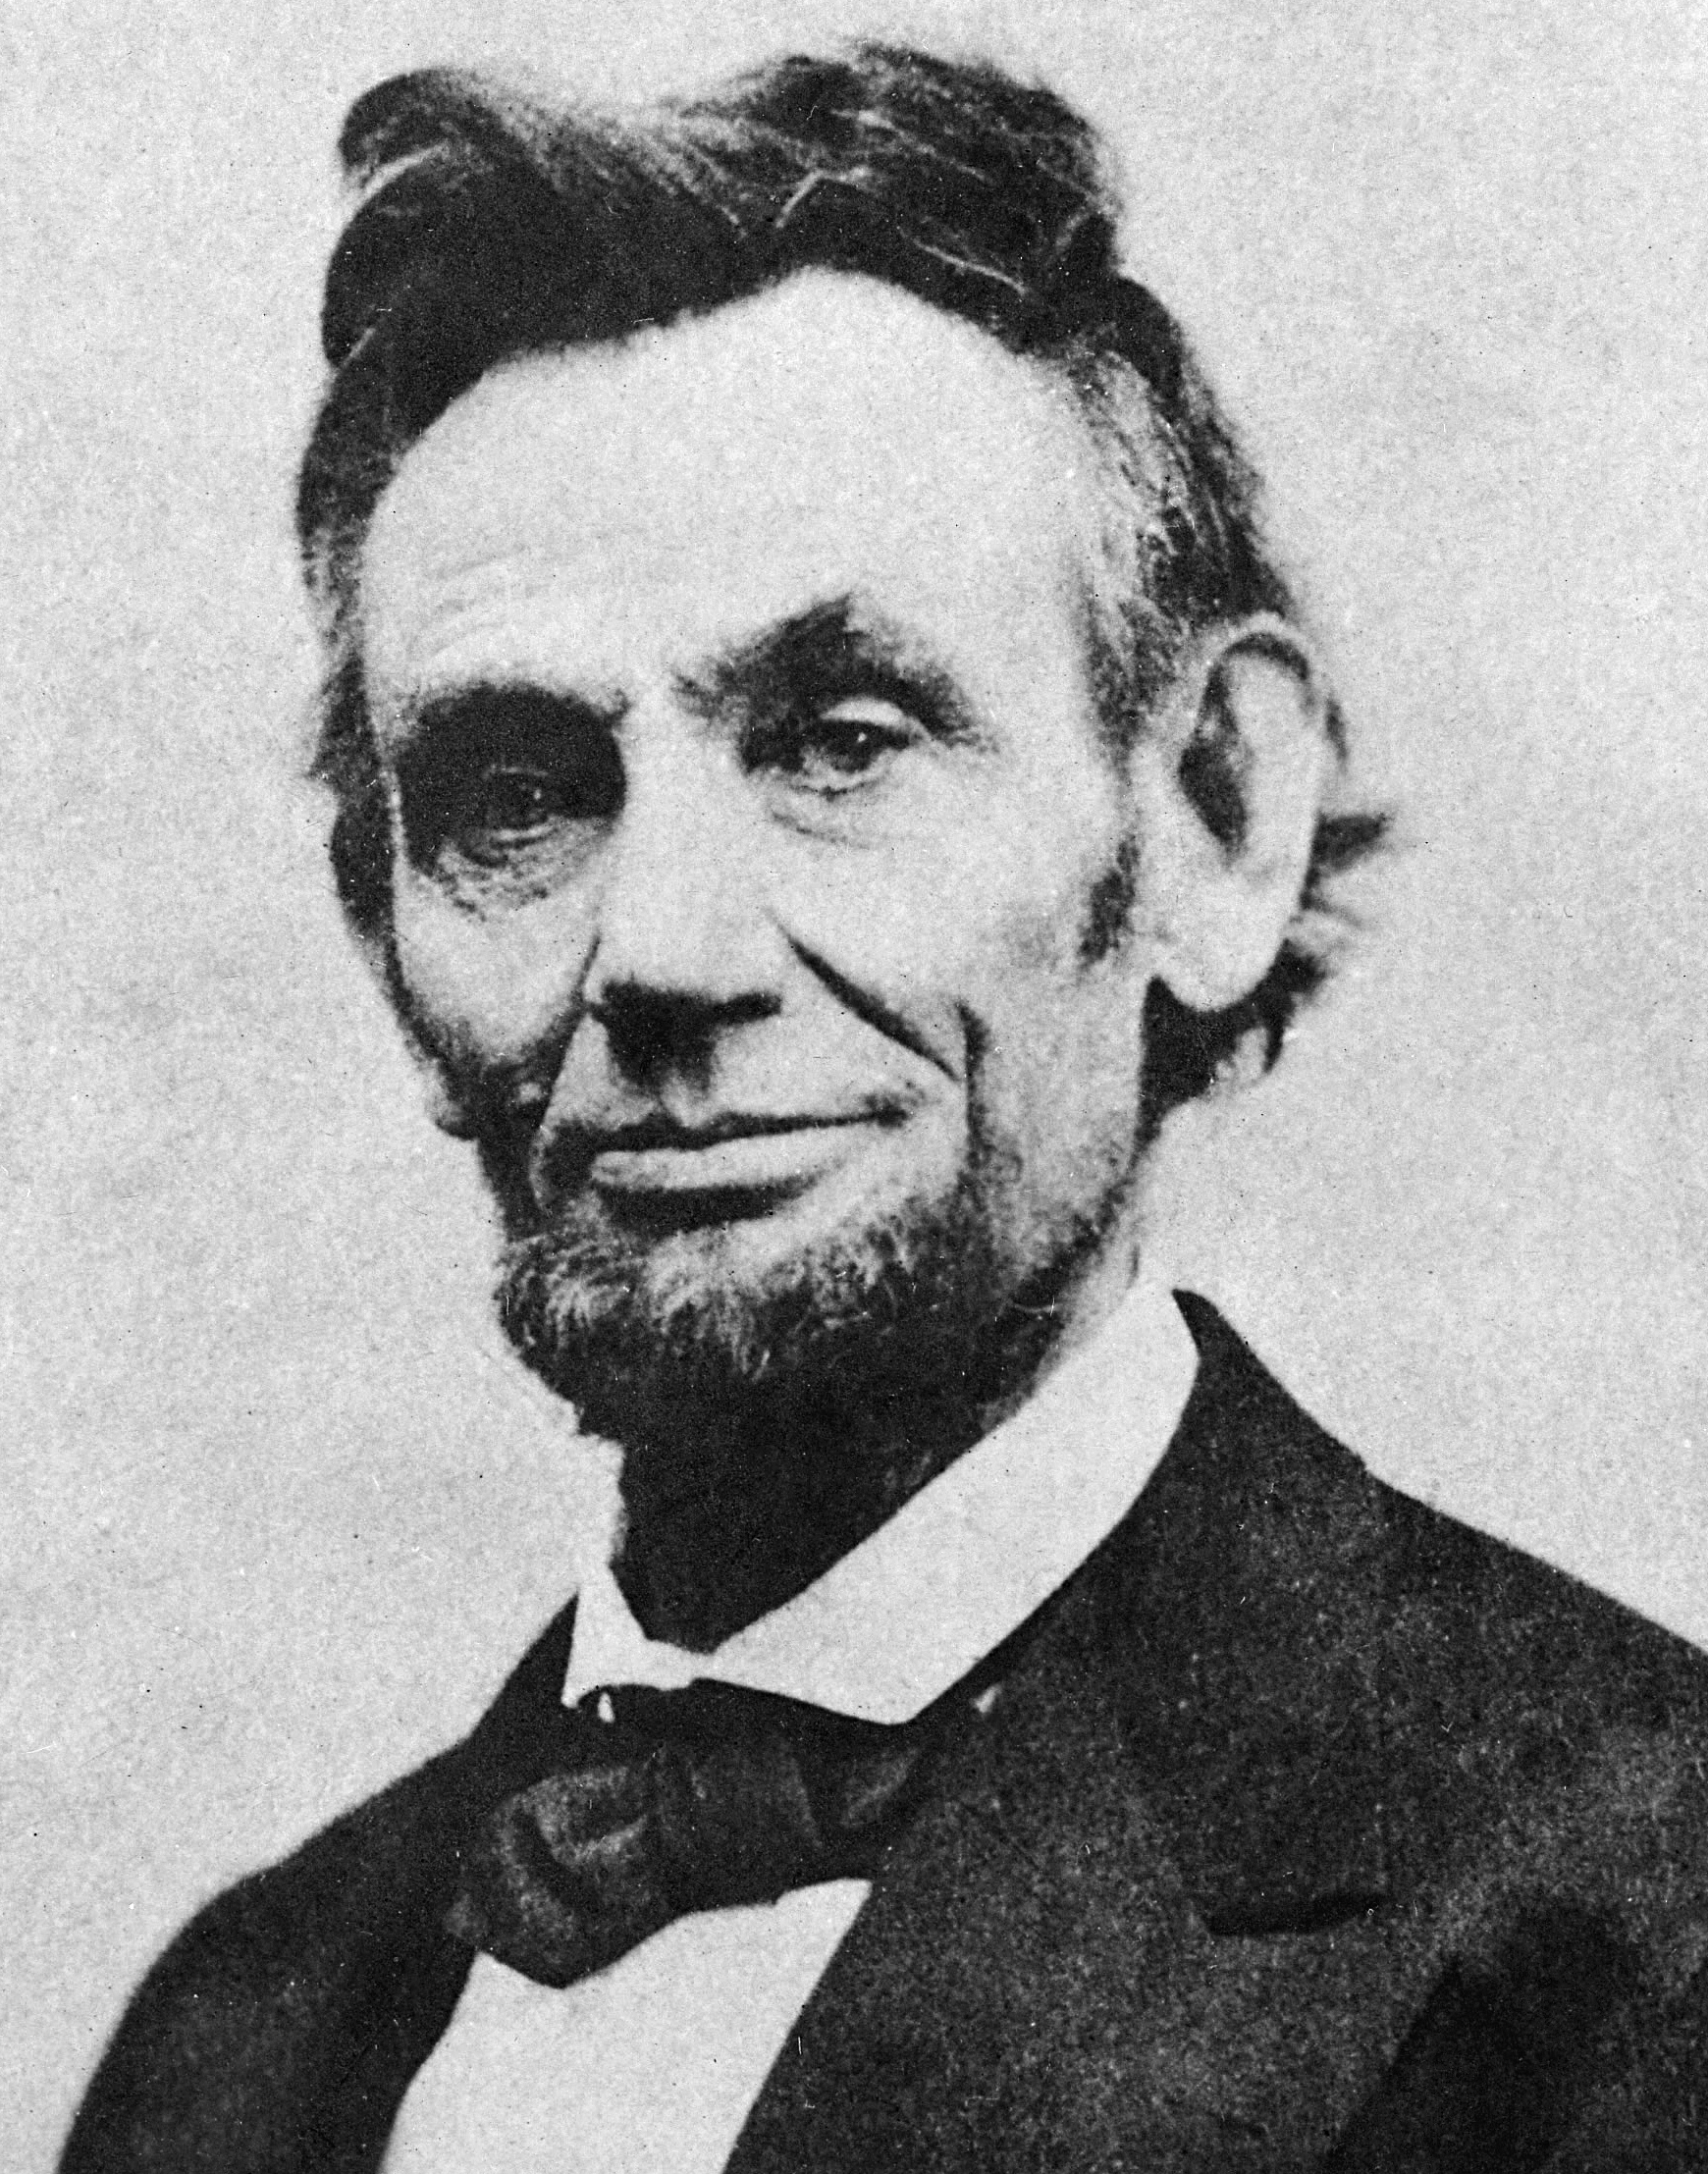 Abraham Lincoln Tops List of Famous Jewish Swimmers